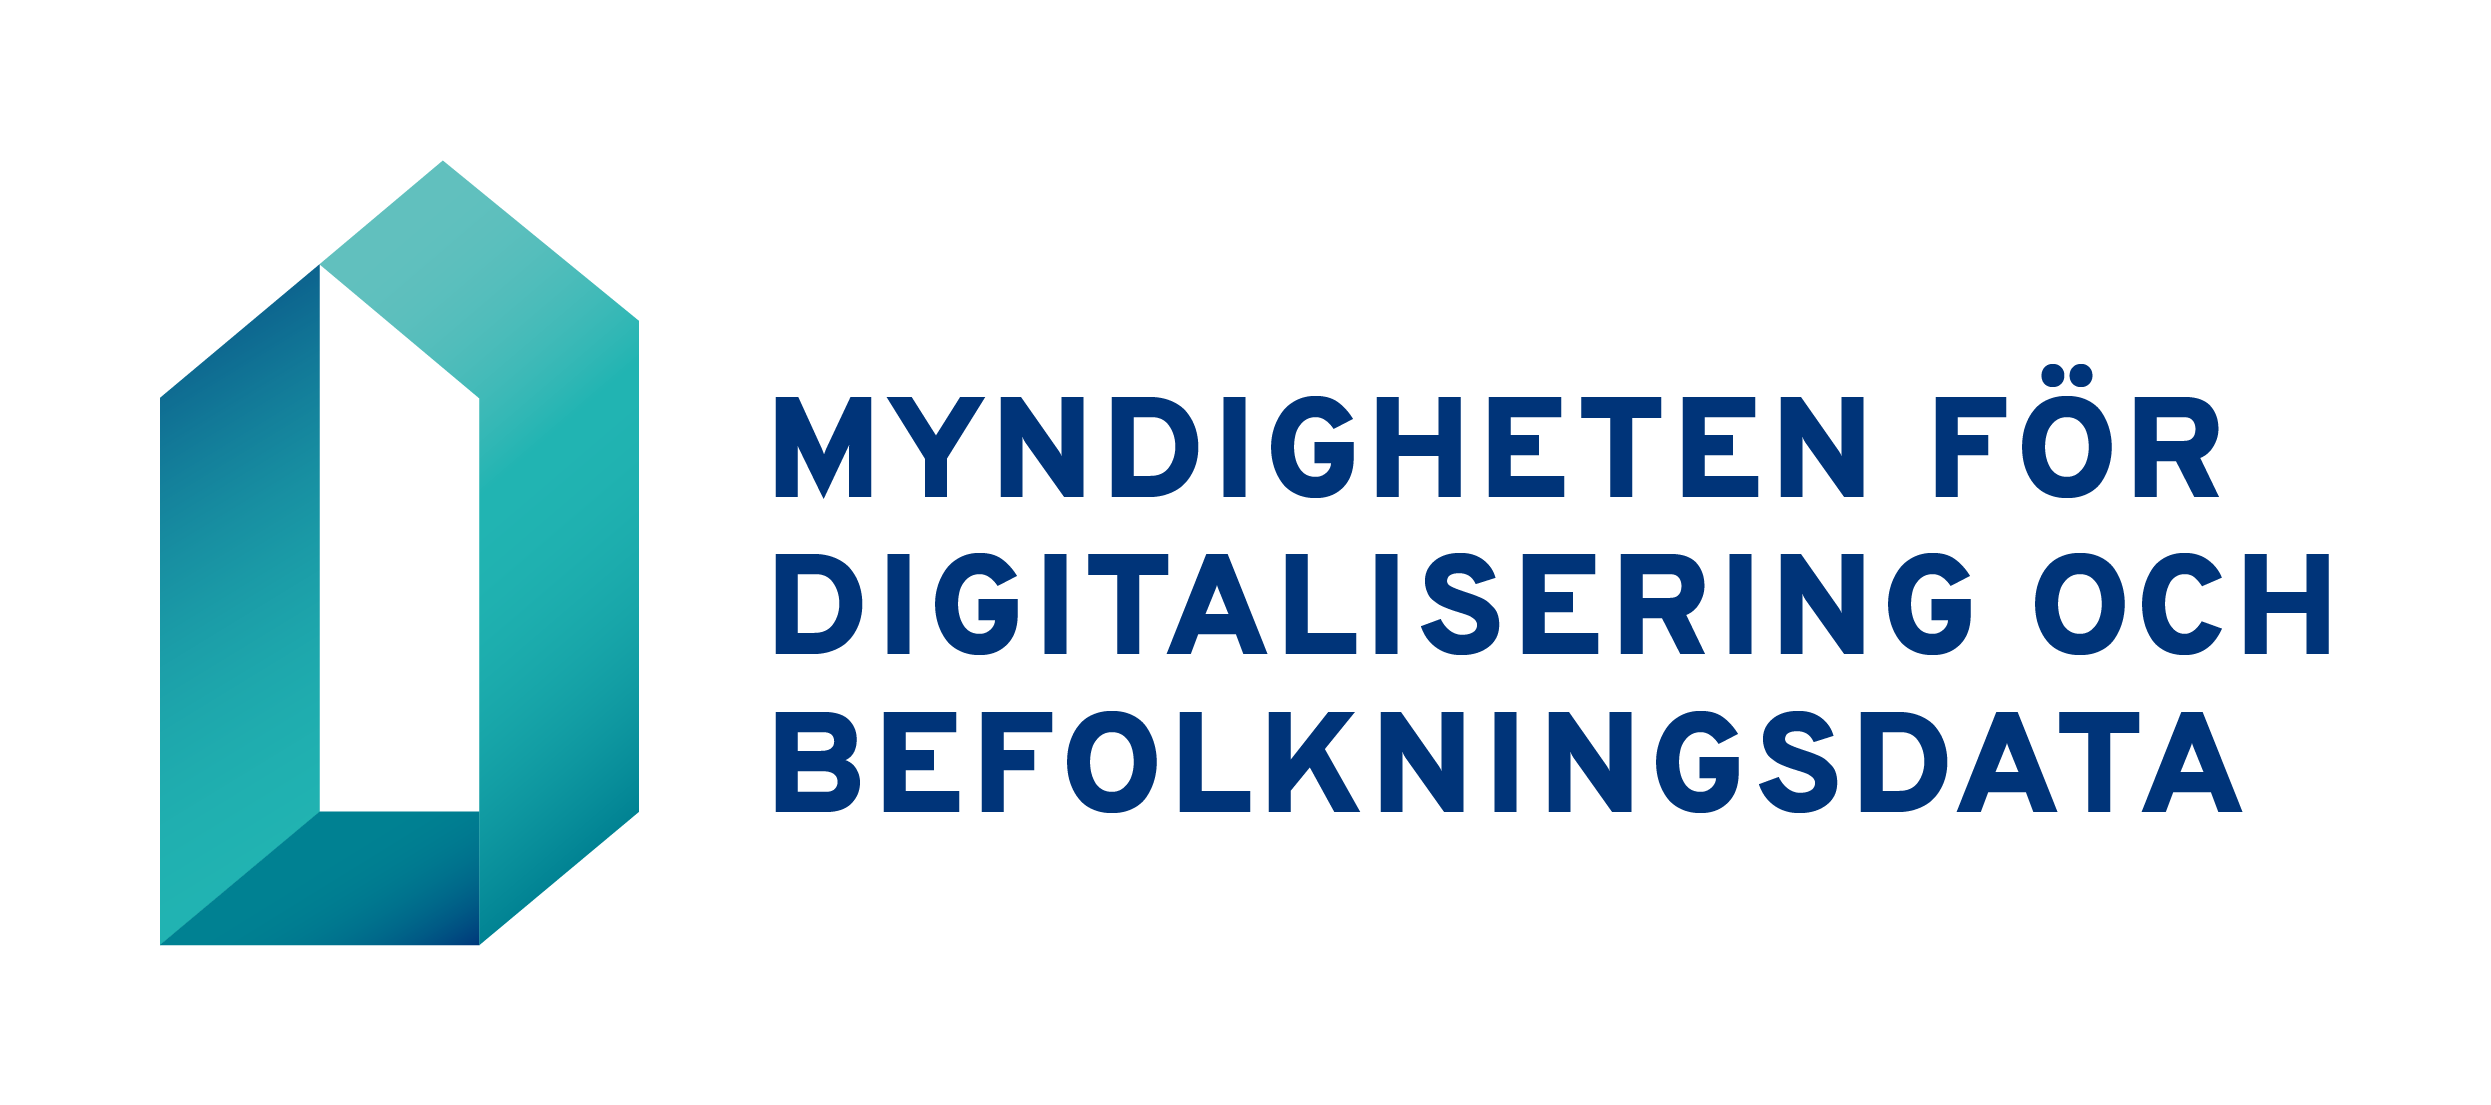 Digital and Population Data Services Agency’s logo in Swedish, normal format